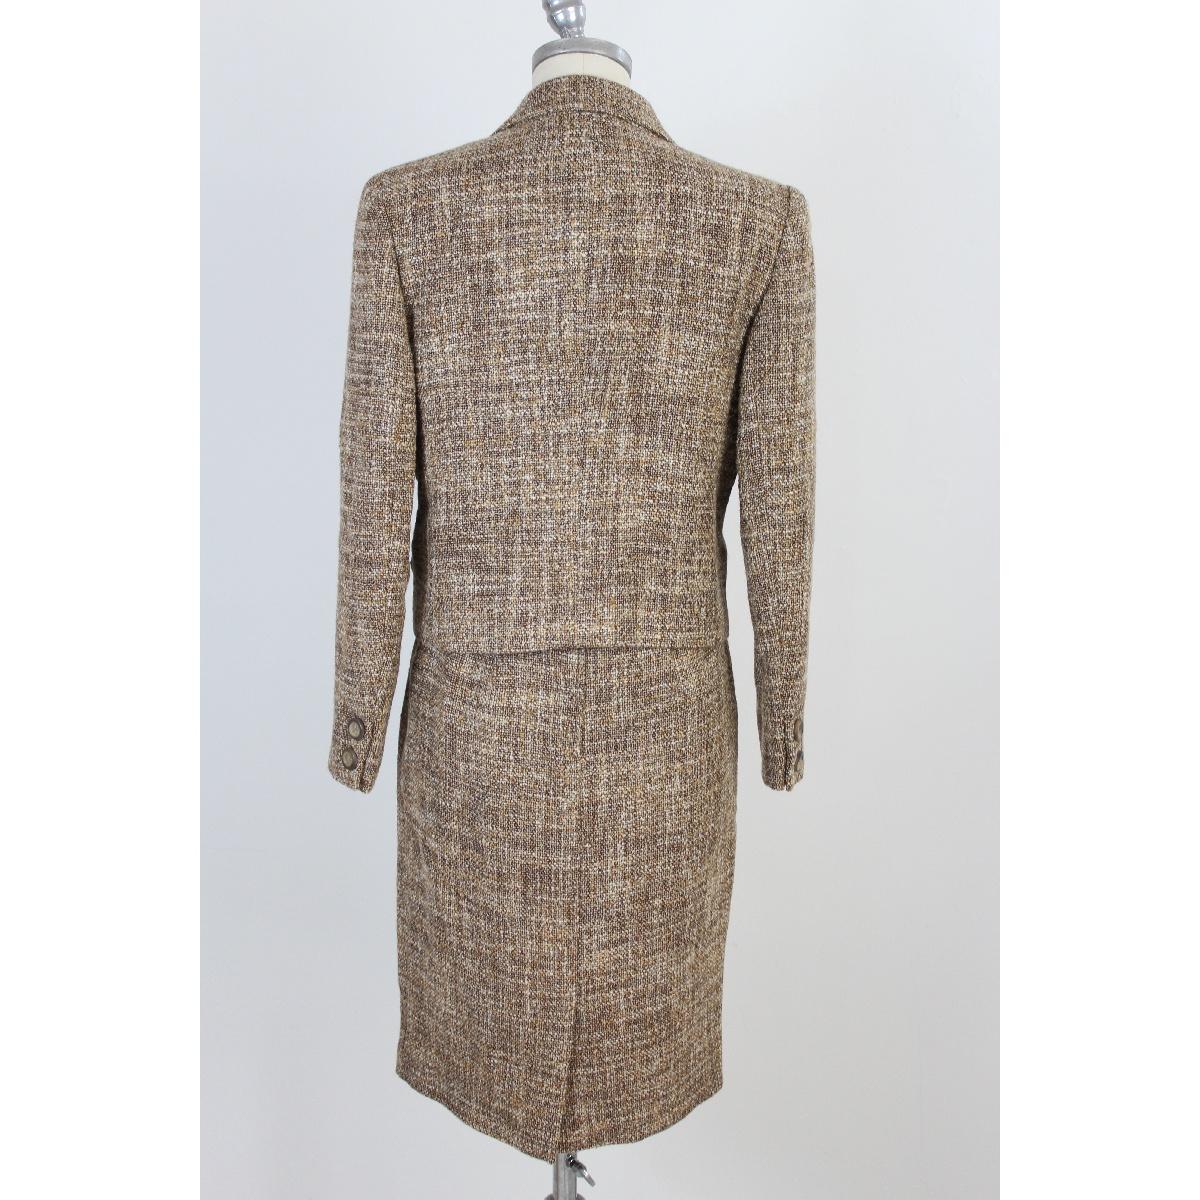 Valentino vintage skirt suit 90s in boucle wool. Slim-fit jacket with floral embroidery on the sides. Fully lined, made in Italy, new with label.

Size 44 It 10 Us 12 Uk

Shoulders: 44 cm
Chest / Bust: 50 cm
Sleeves: 60 cm
Length: 59 cm

Skirt